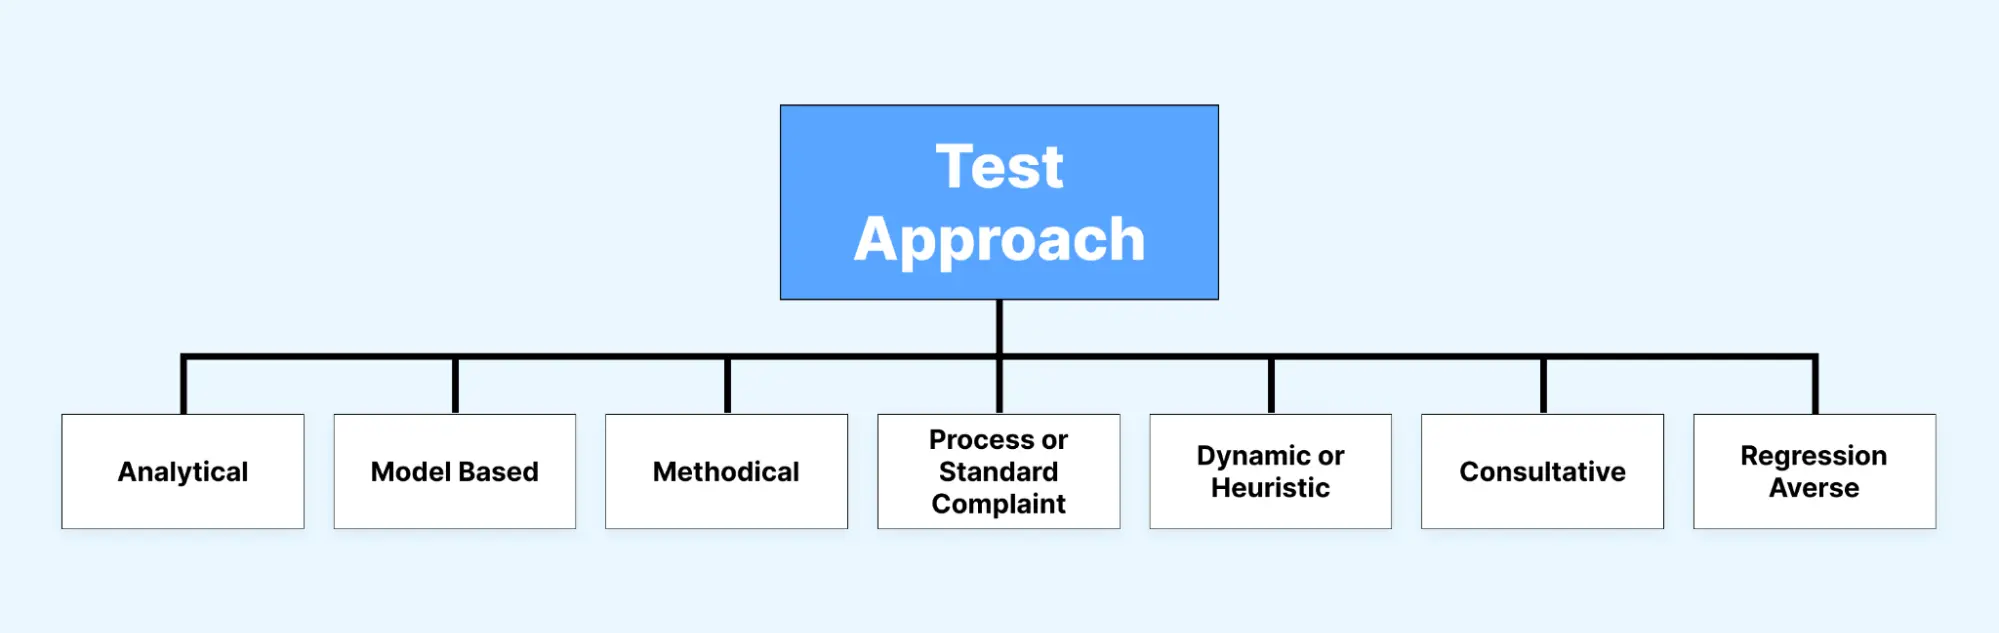 Test Approach Different Test Approaches